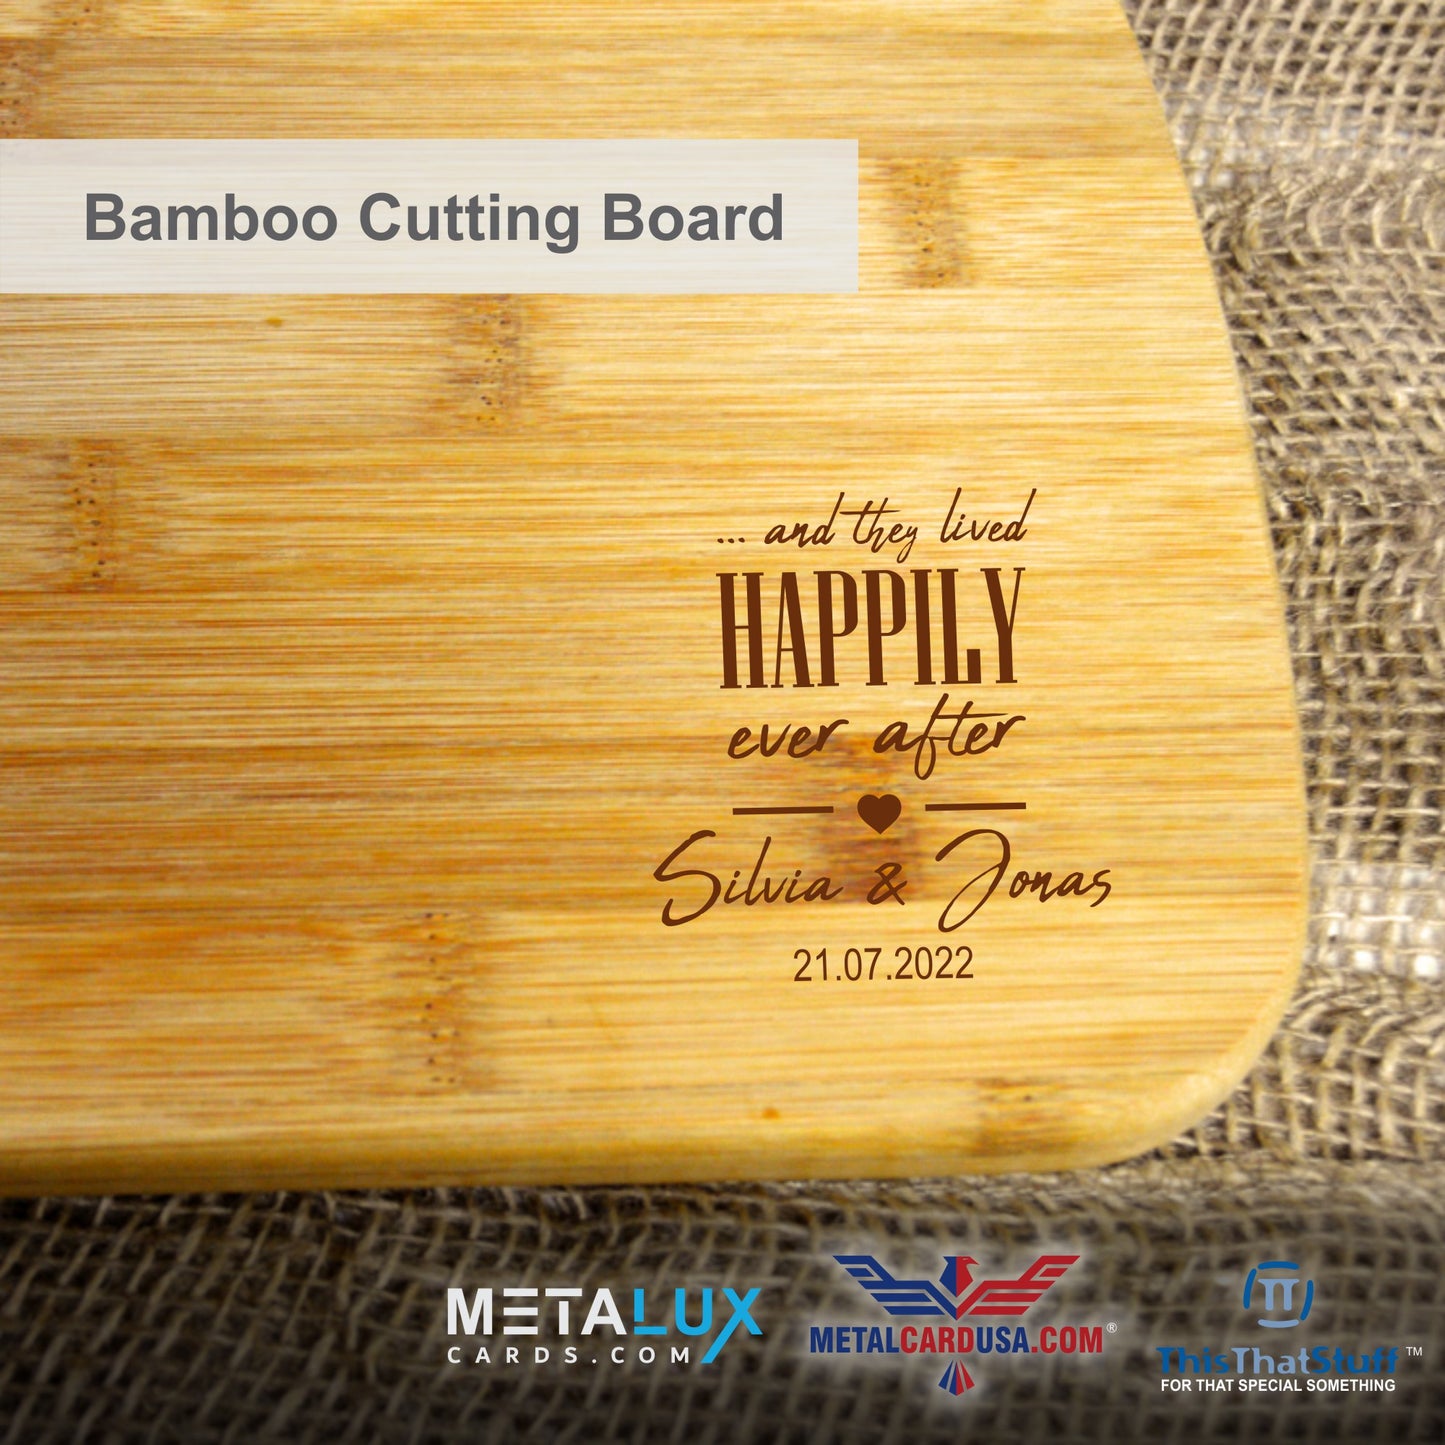 Custom Bamboo Cutting Board | Couple, Family, Wedding, Birthday, Home Sweet Home | Engraved directly on bamboo - Comes in two sizes